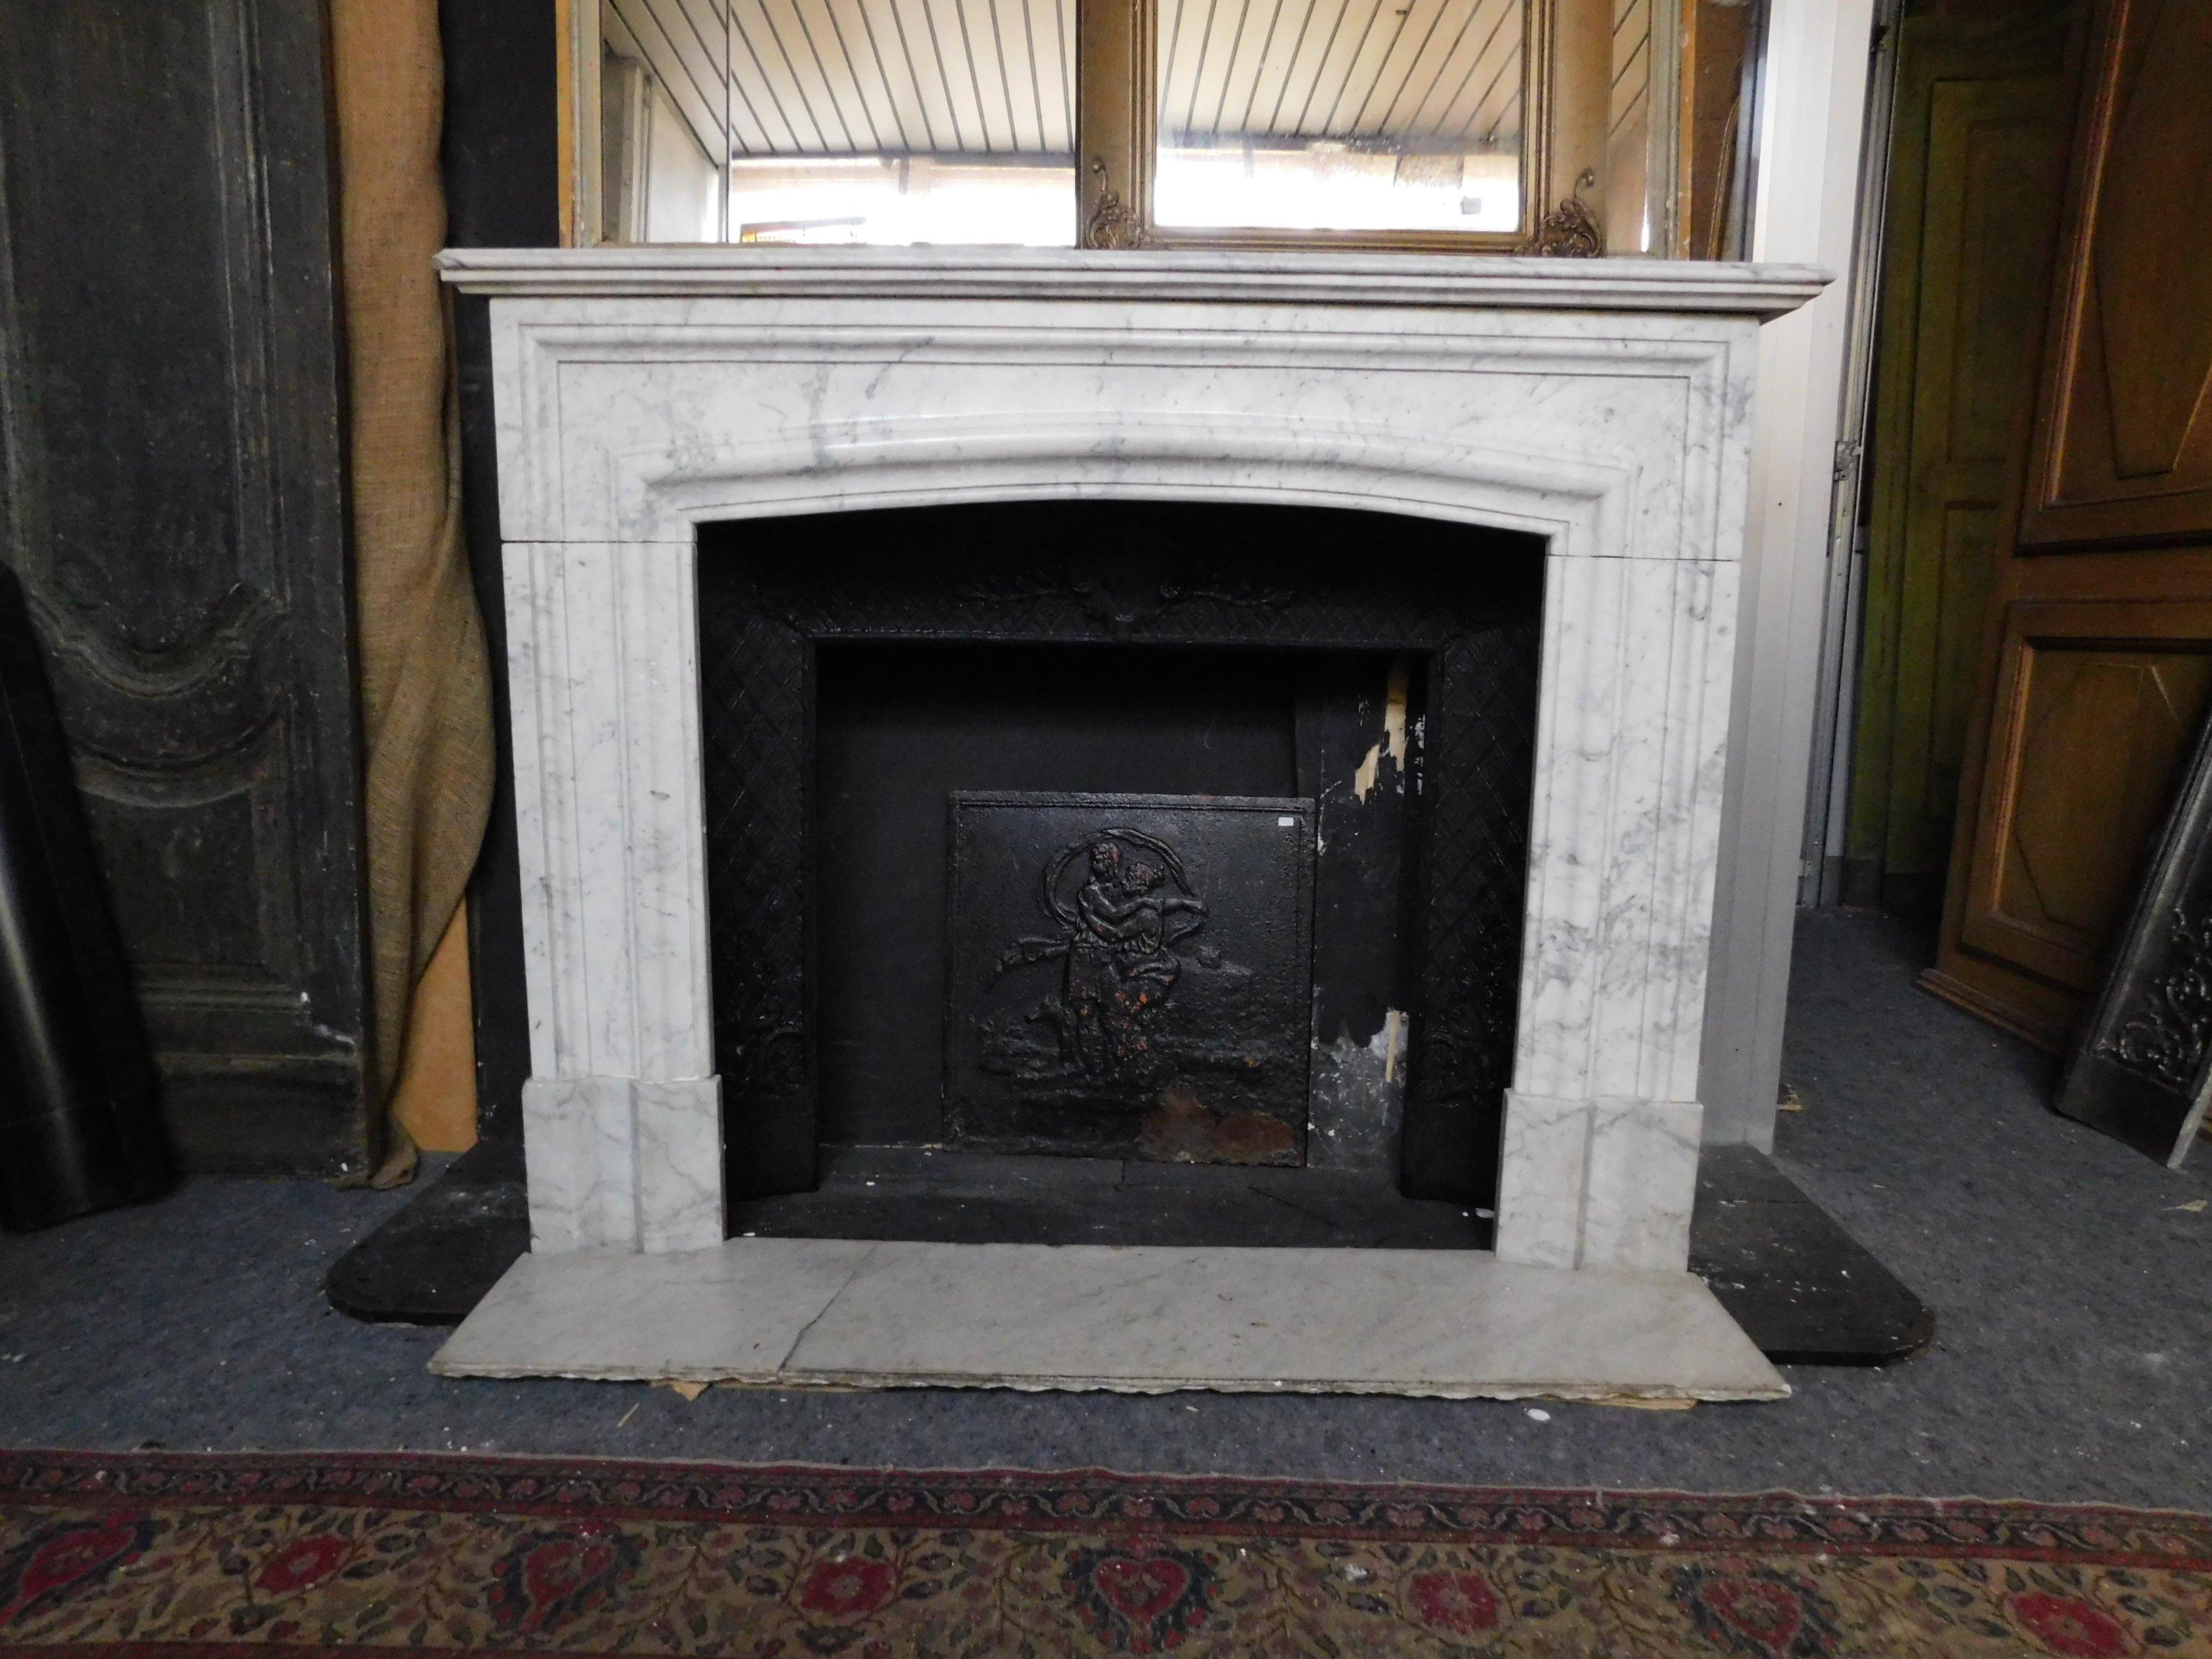 Antique fireplace in white Carrara marble, sculpted with a simple geometric shape but of great elegance as it was used at the time, built completely by hand in the mid-19th century for a palace in Italy (precisely Liguria) complete with original